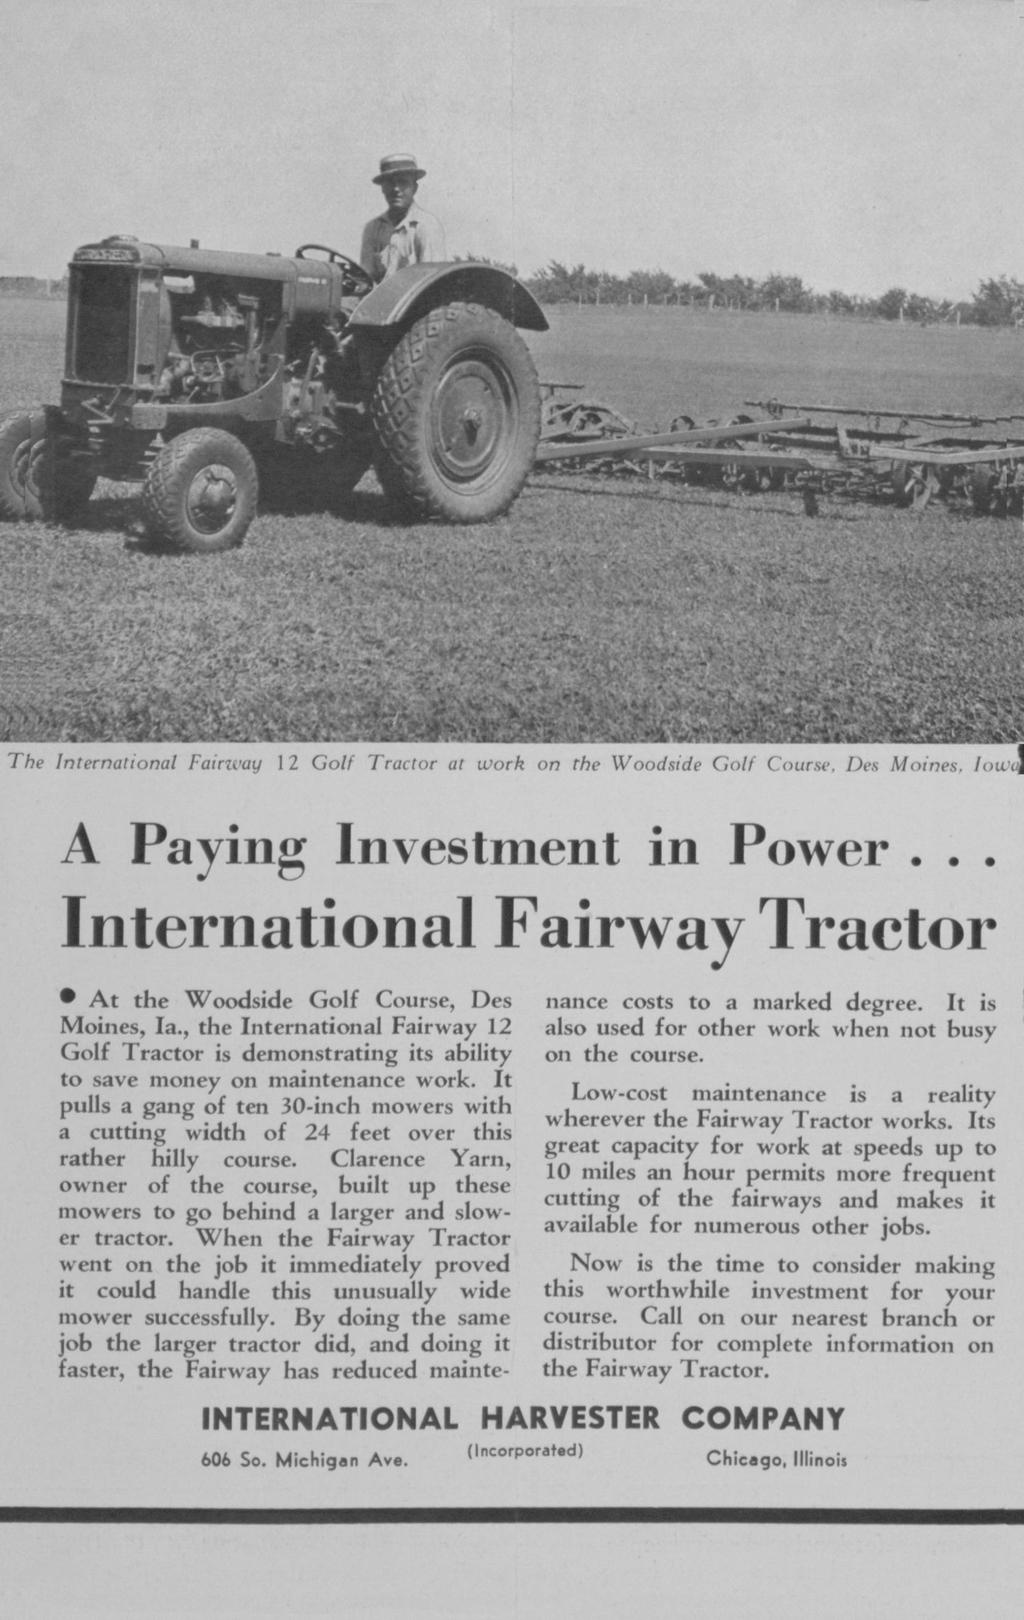 The International Fairway 1 2 Coif Tractor at work on the Woodside Coif Course, Des Moines, /oit'd A Paying Investment in Power.